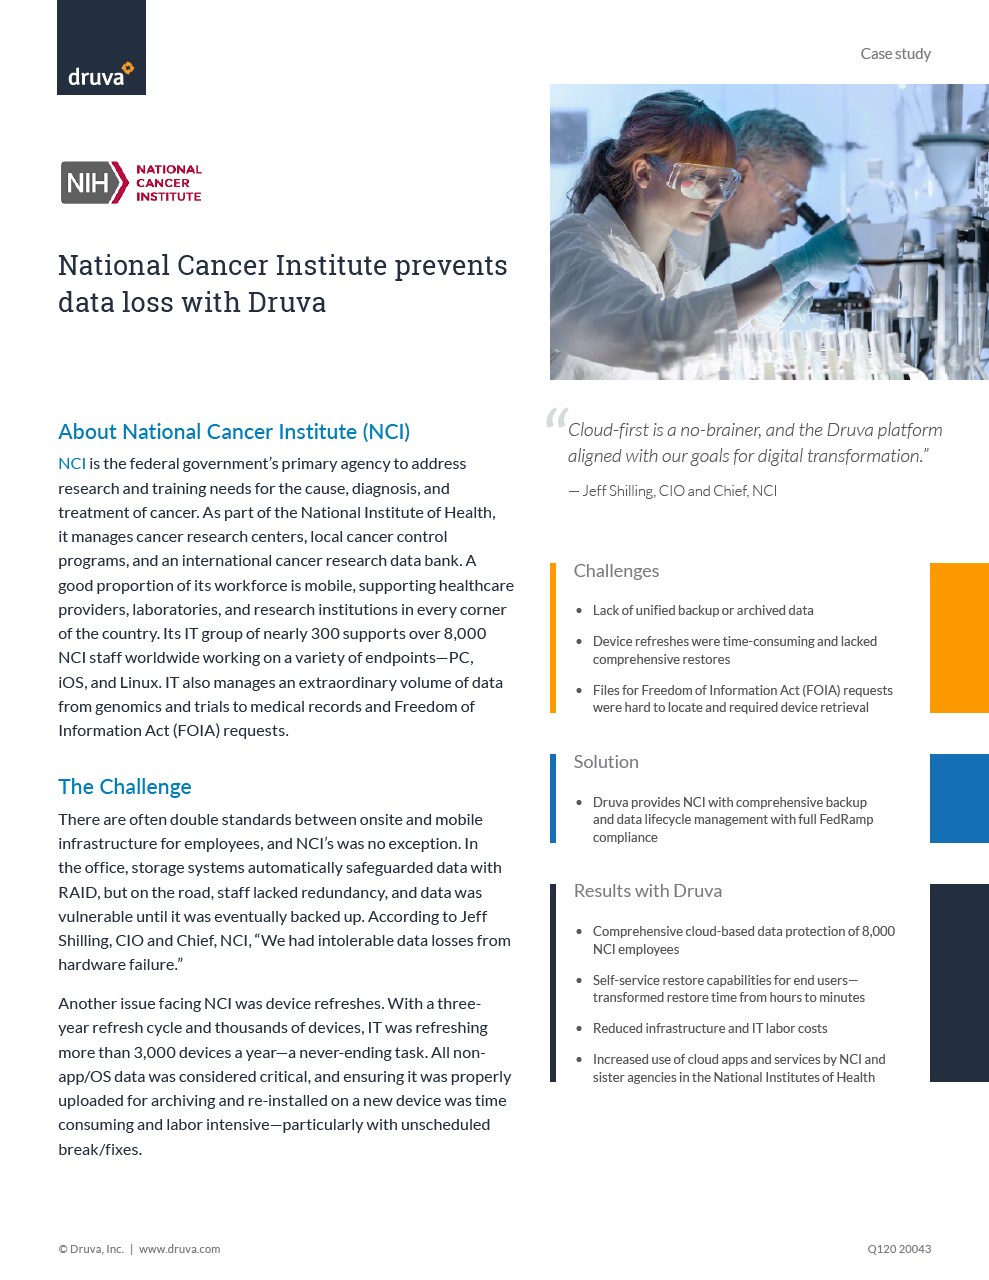 National Cancer Institute prevents data loss with Druva